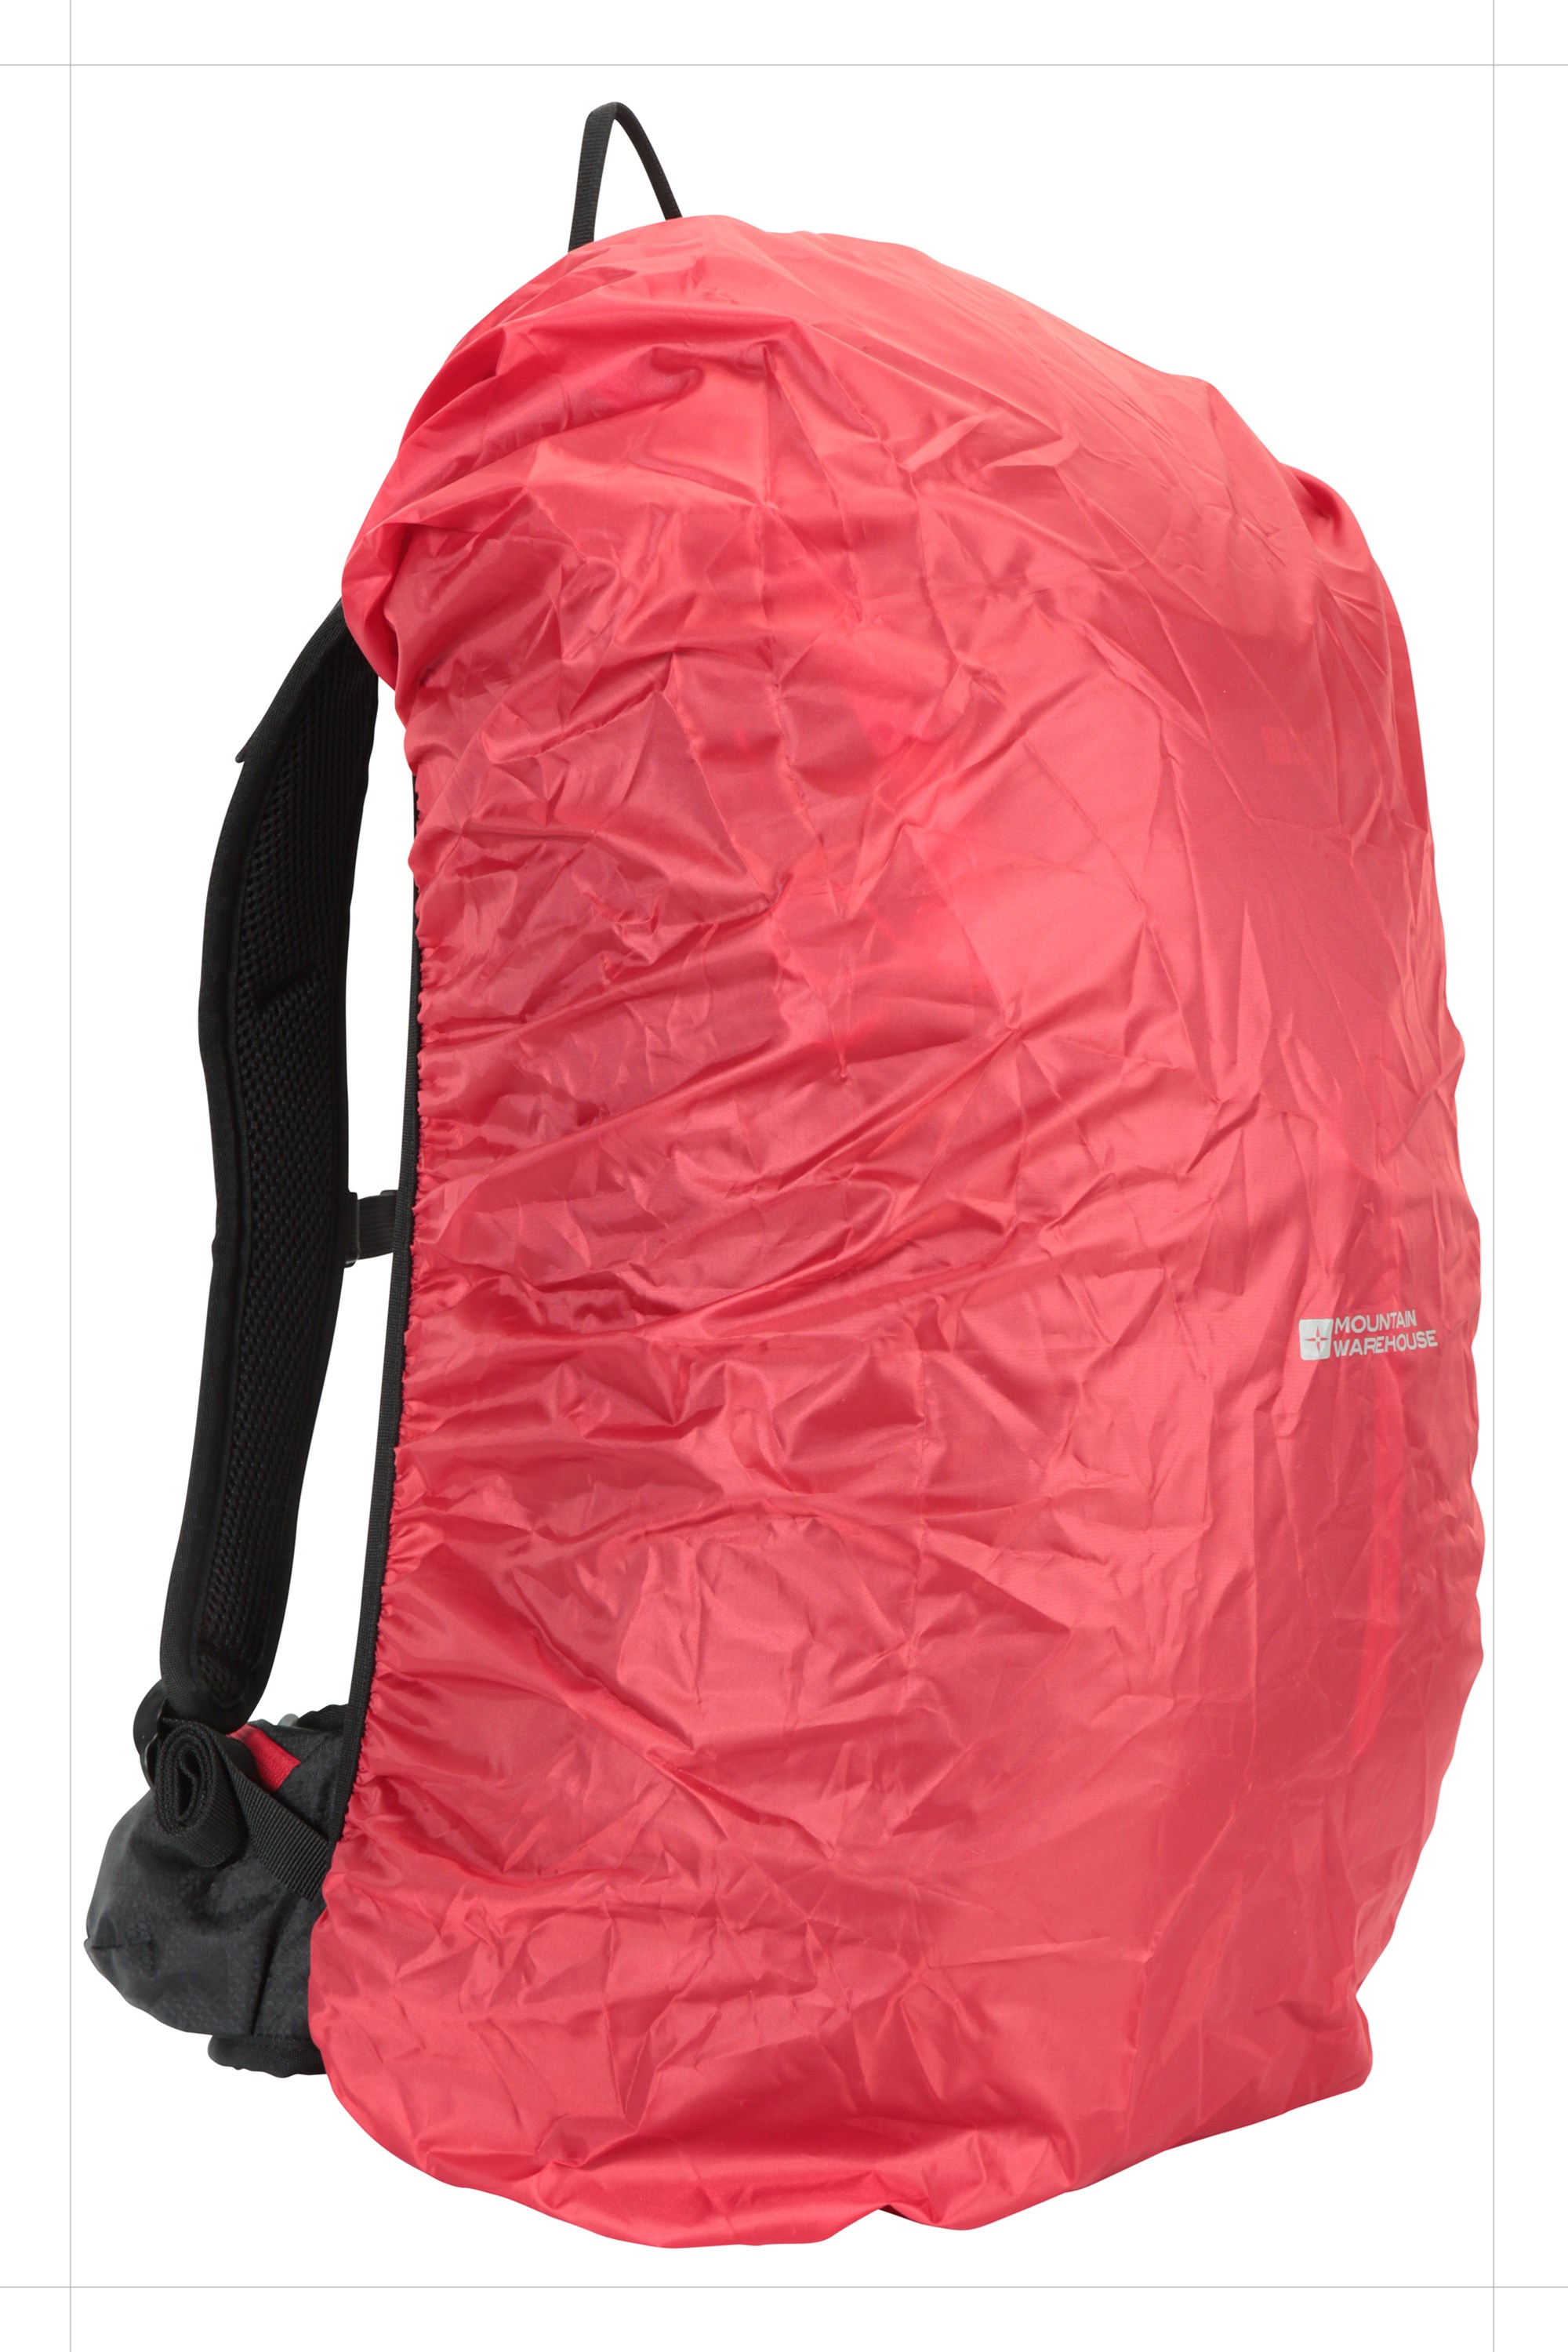 Mountain Warehouse Uni Inca Extreme 35L Mid Backpack 